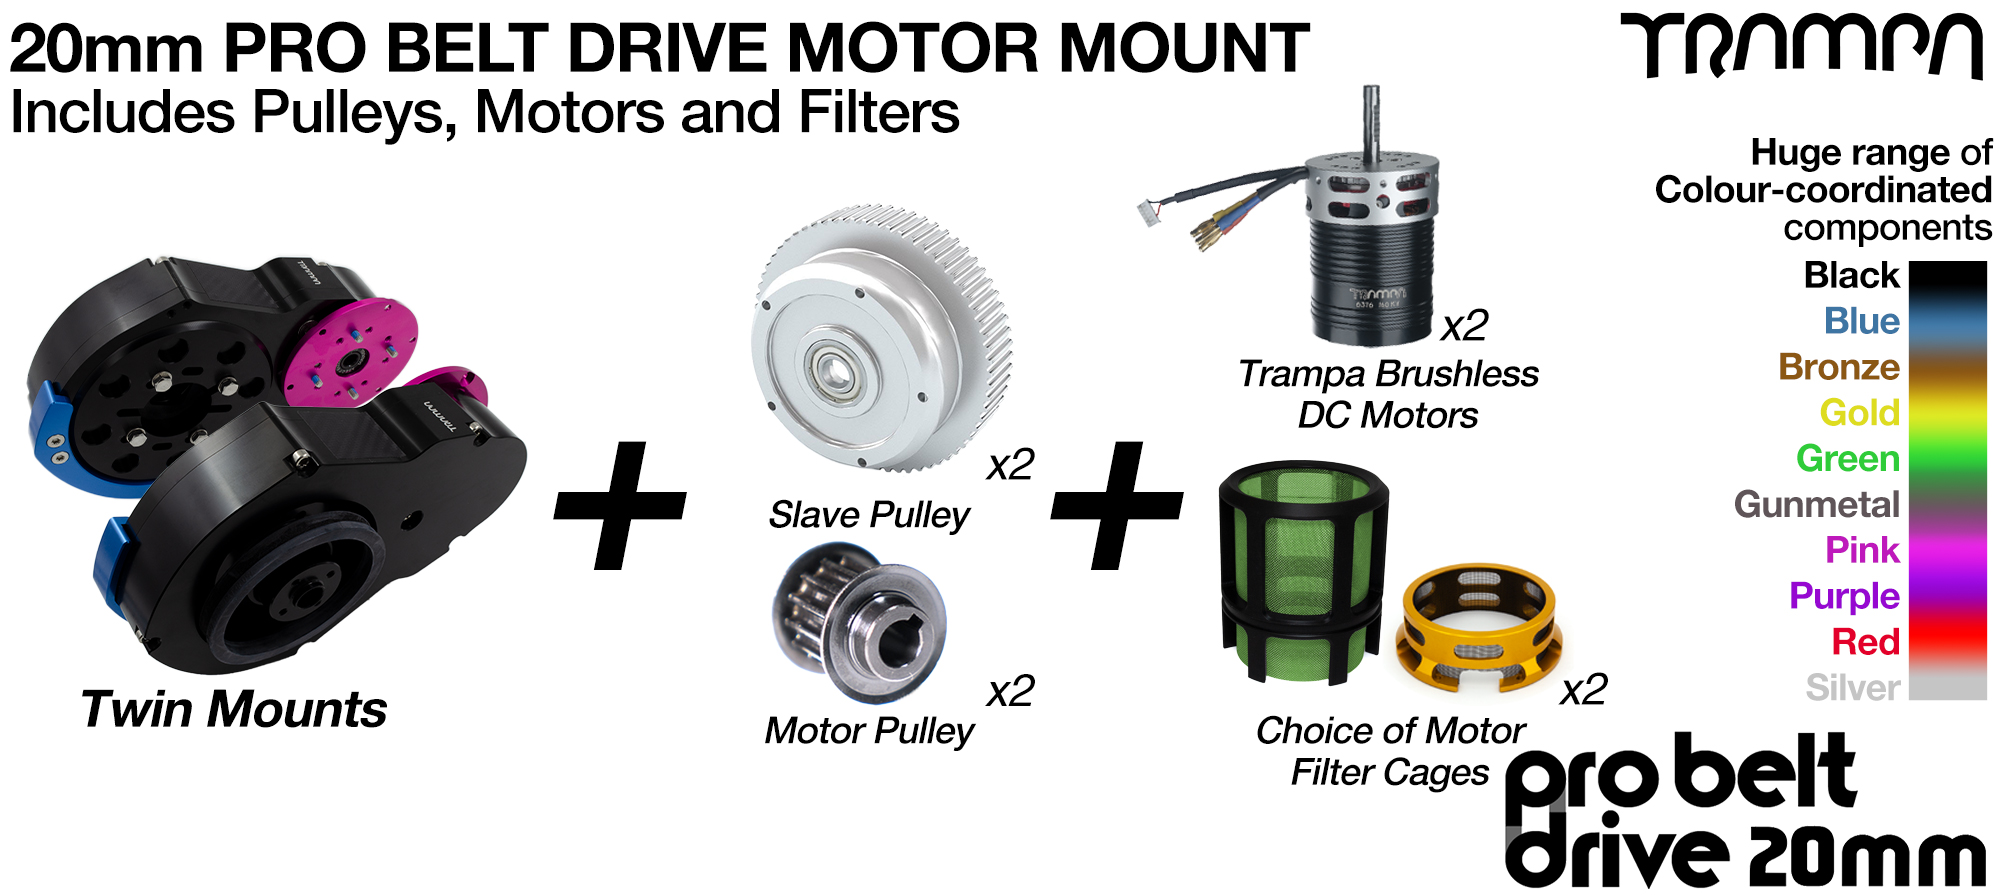 20mm PRO BELT DRIVE Motor Mounts with MOTORS PULLEYS & Motor PROTECTION FILTERS - LOADED